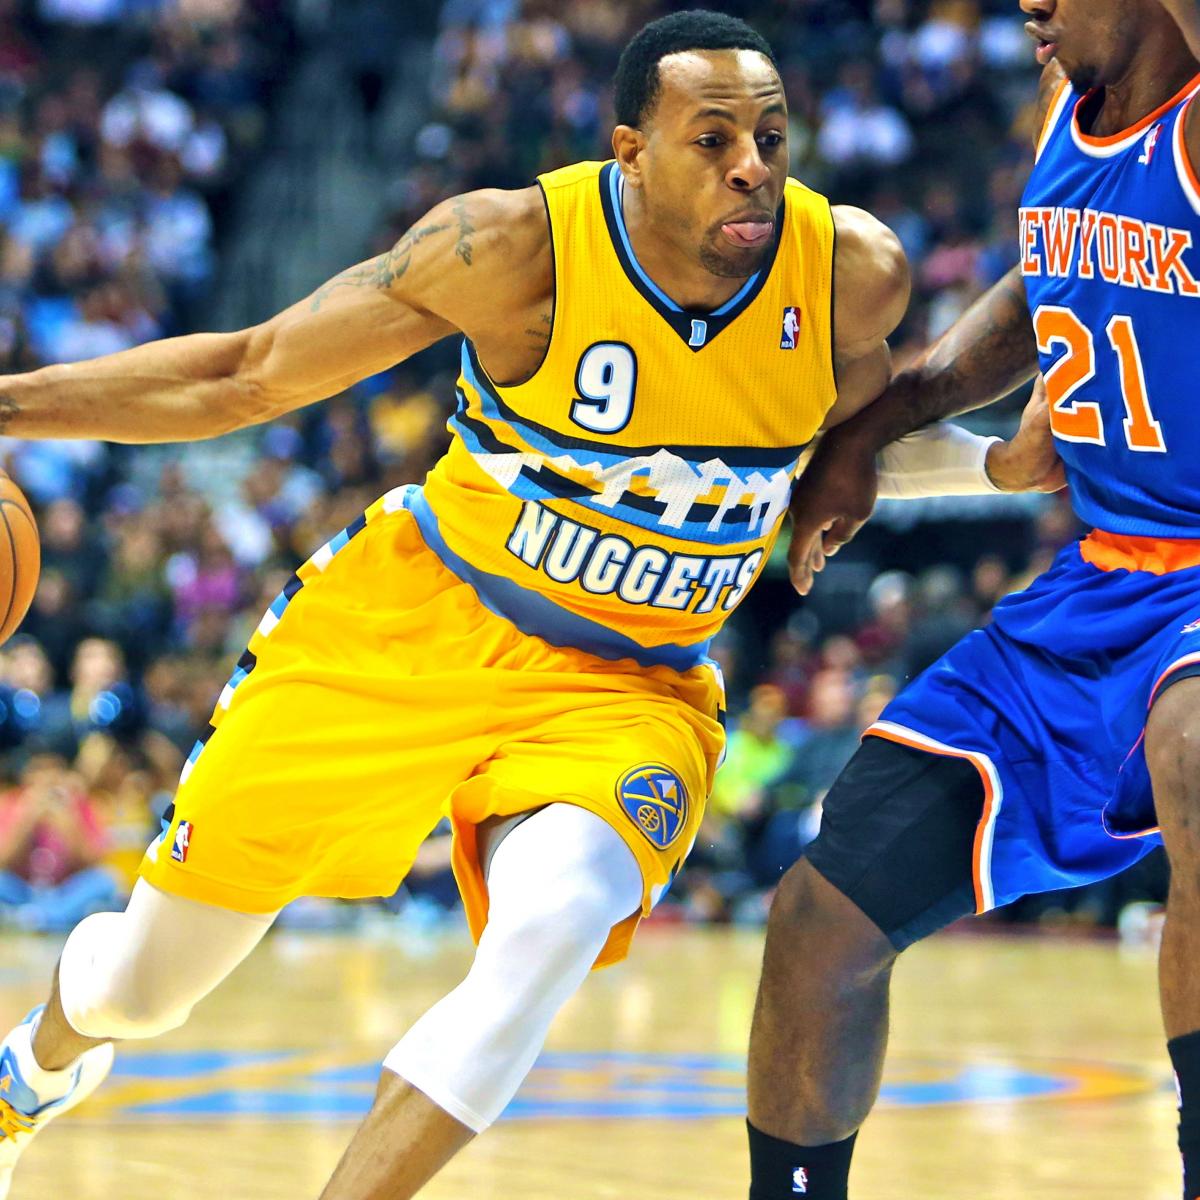 New York Knicks vs. Denver Nuggets Live Score, Results and Game